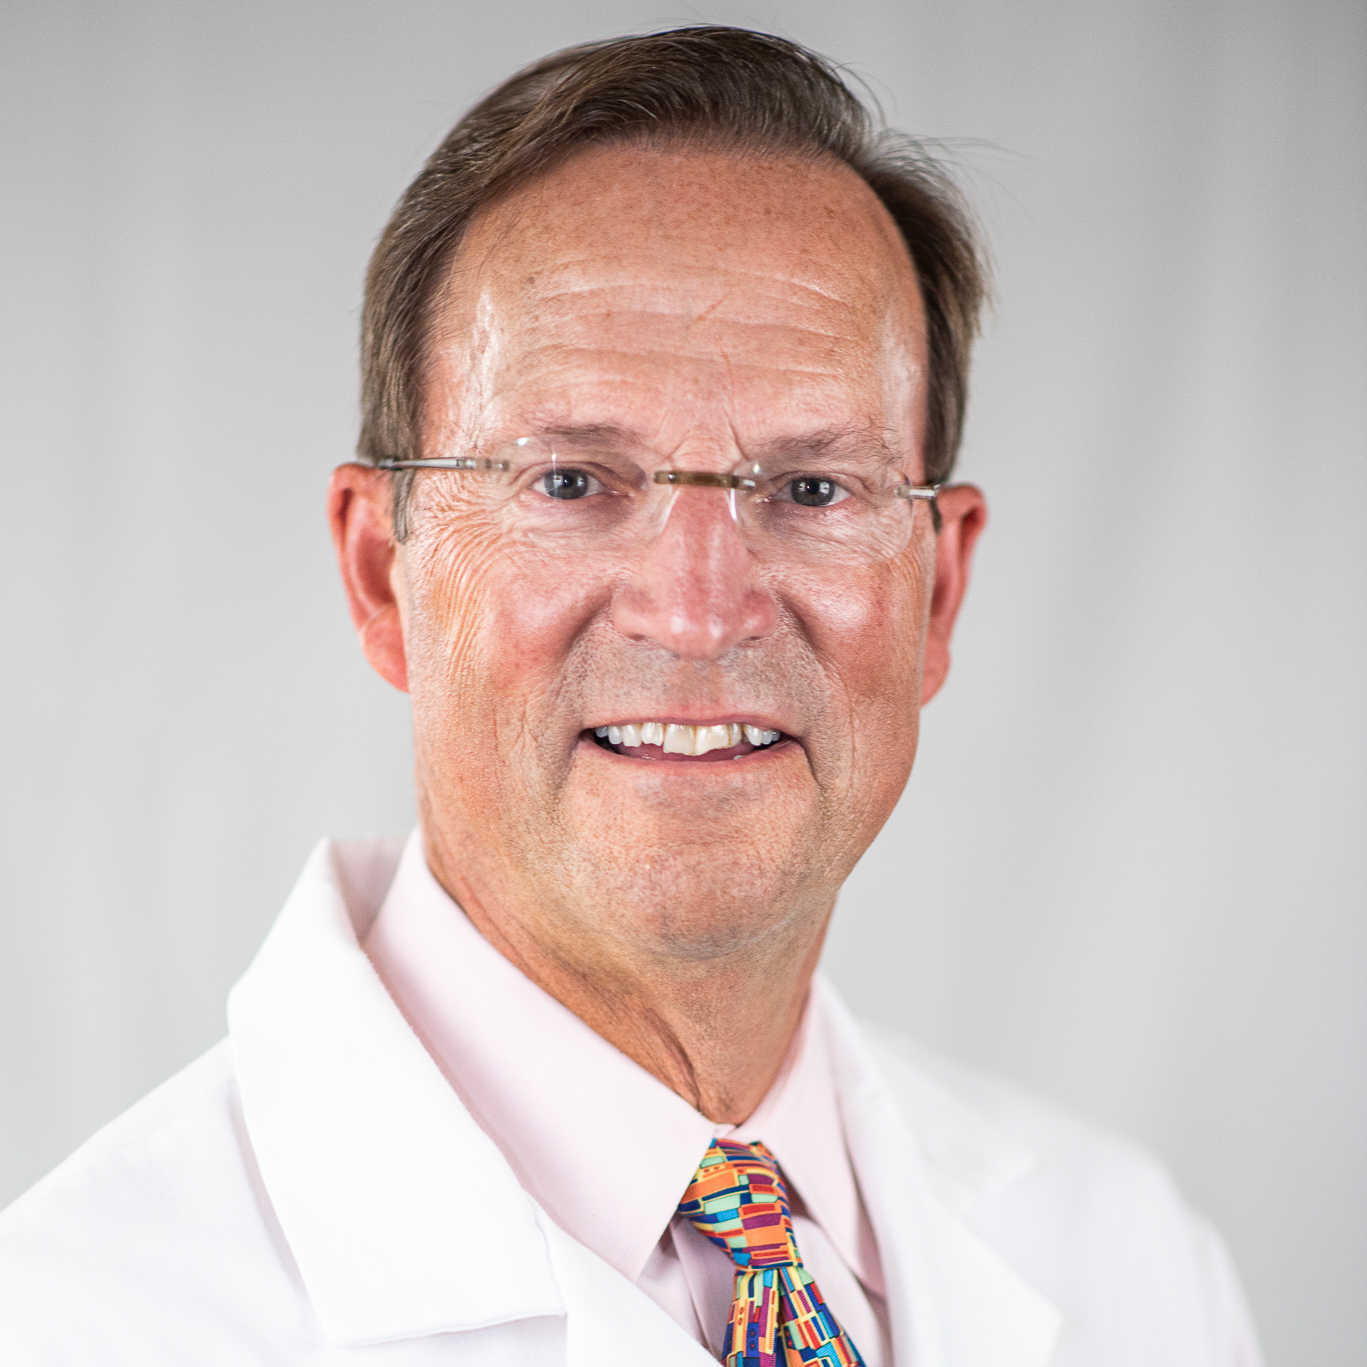 David A. Halsey MD, named first vice president of the American Academy of Orthopaedic Surgeons